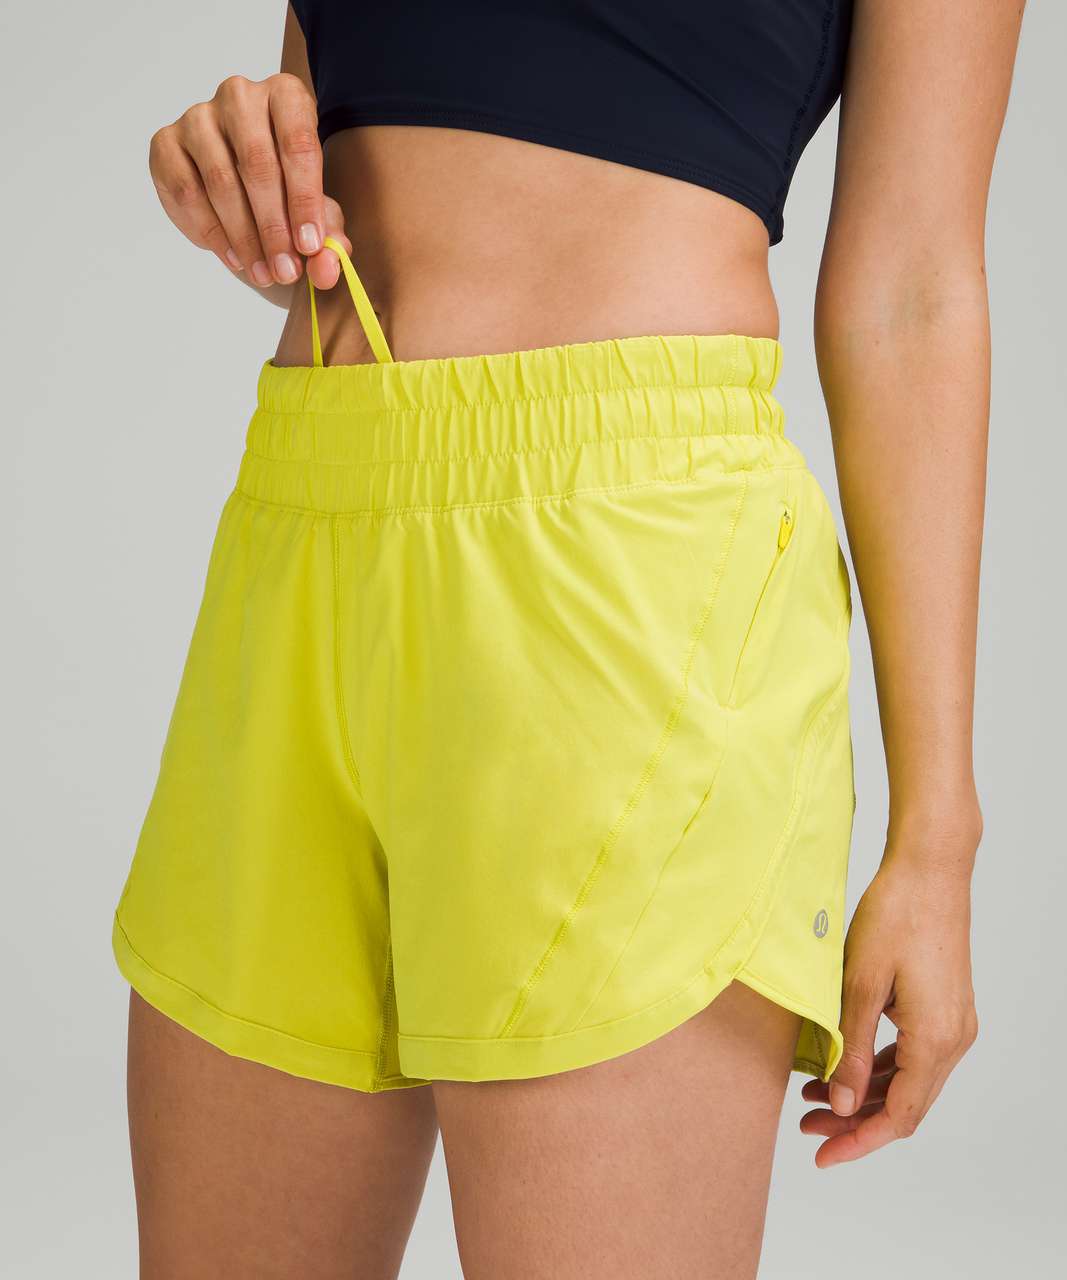 Spring Breeze Shorts in Yellow Mist